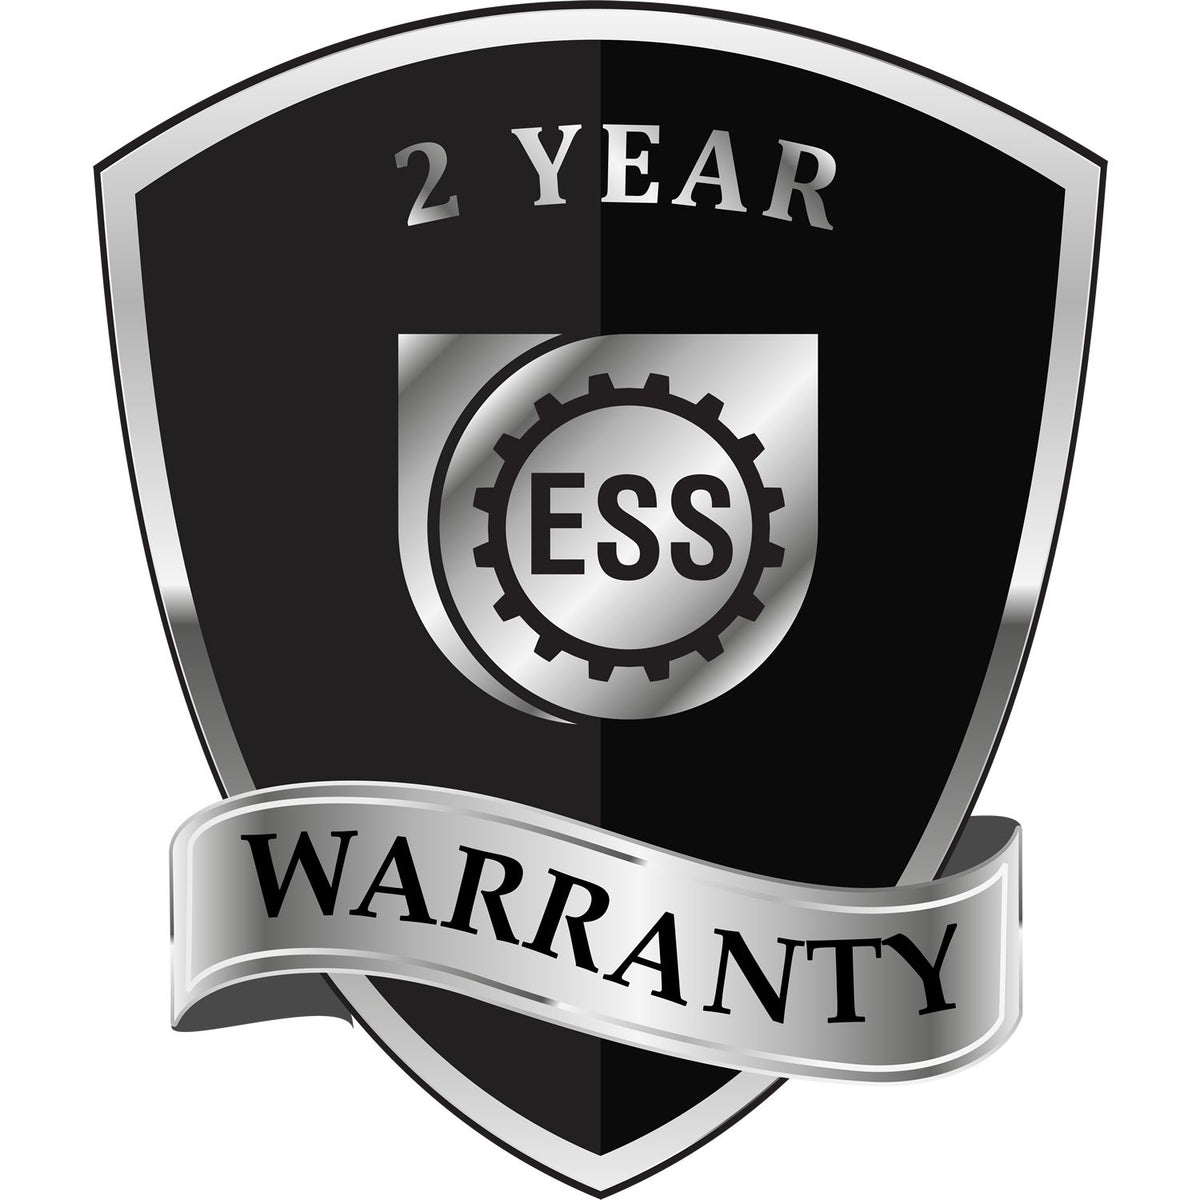 A badge or emblem showing a warranty icon for the Rhode Island Desk Architect Embossing Seal